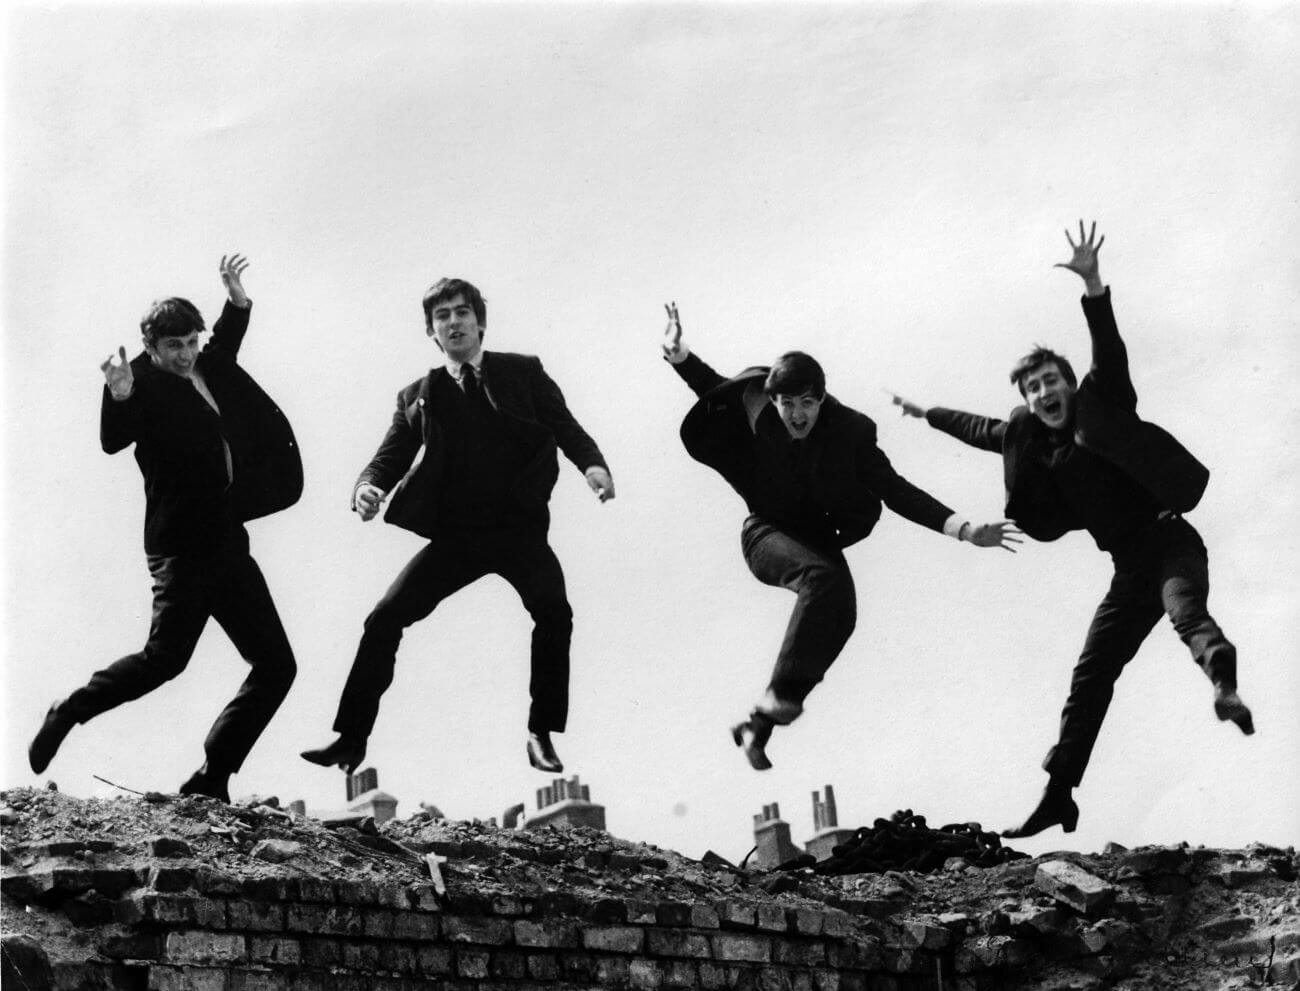 Ringo Starr, George Harrison, Paul McCartney, and John Lennon jump up in the air over a brick wall.